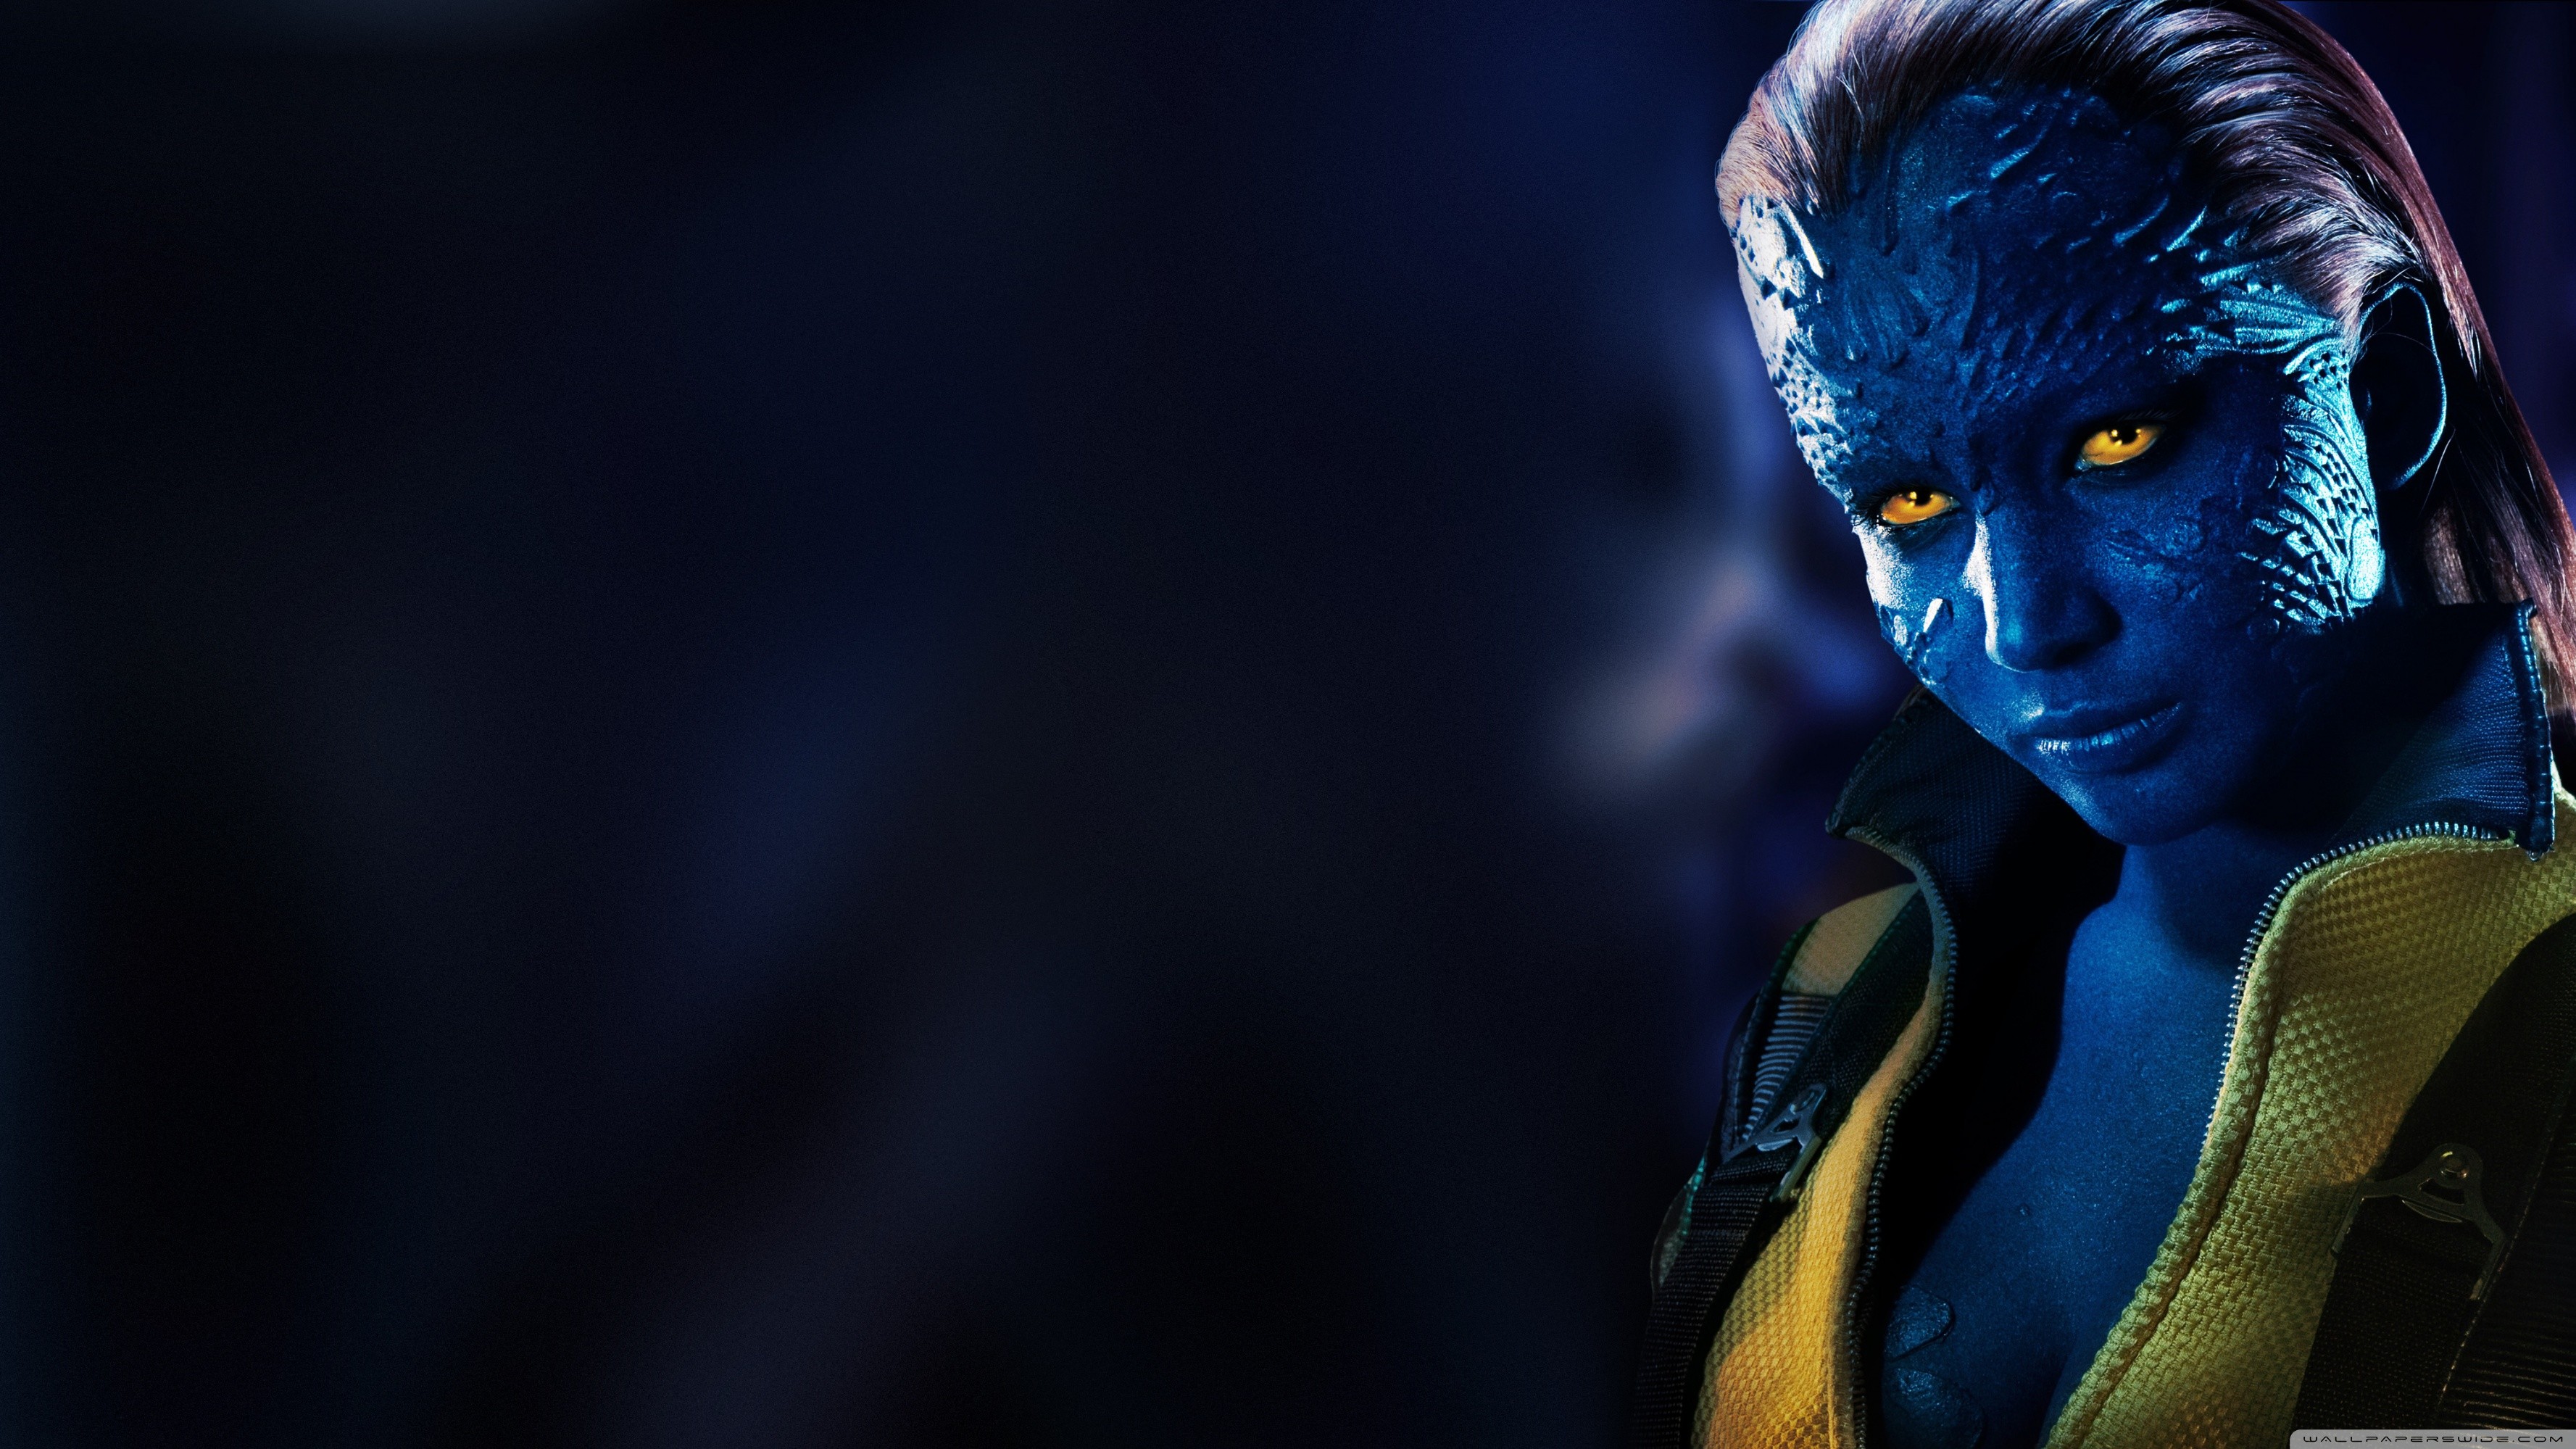 Jennifer Lawrence May Star as Mystique in X-Men Spinoff | Time